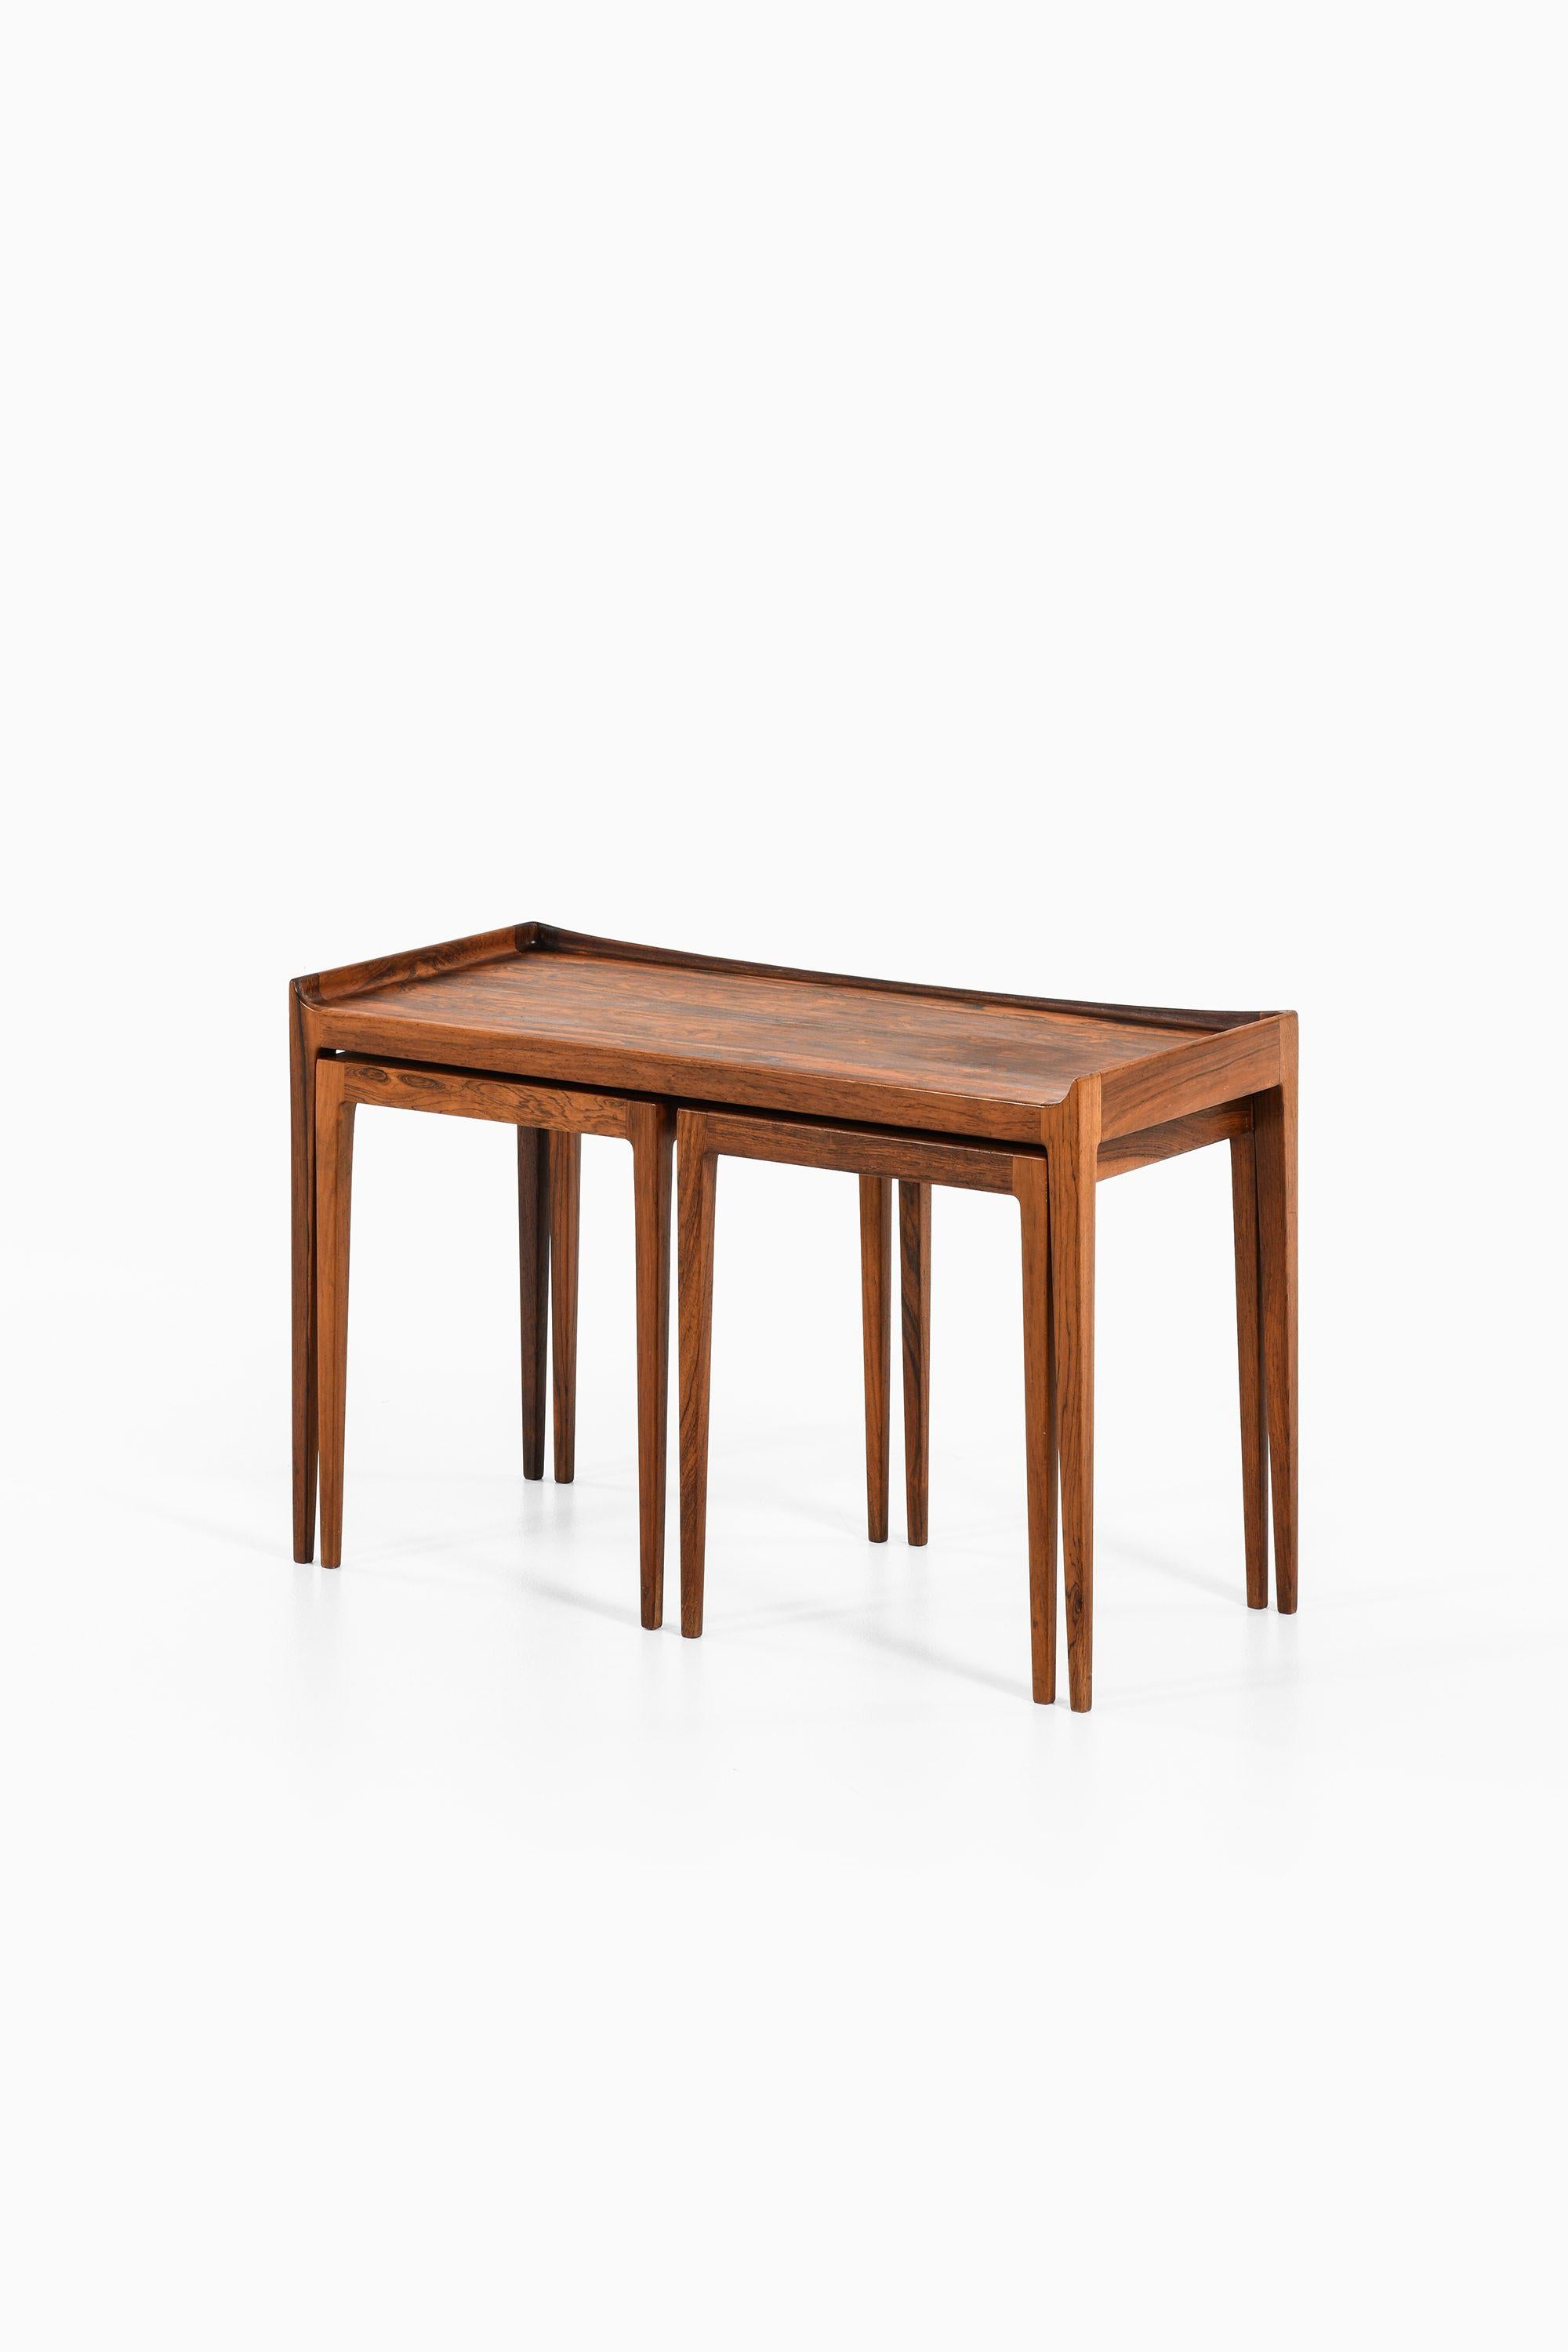 Danish Nesting Tables in Rosewood by Kurt Østervig, 1960's For Sale